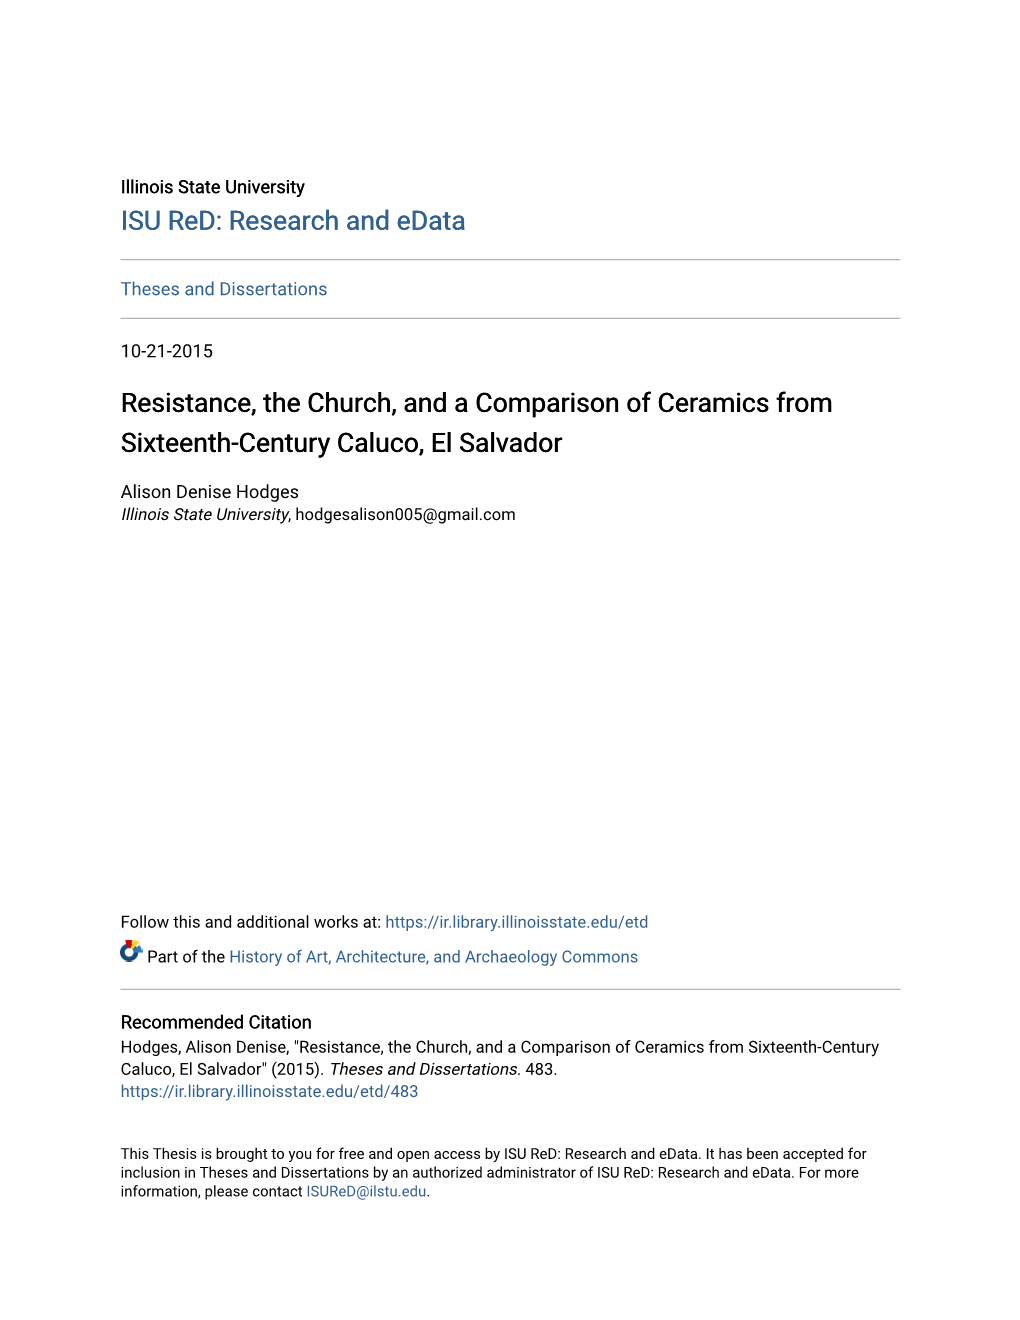 Resistance, the Church, and a Comparison of Ceramics from Sixteenth-Century Caluco, El Salvador